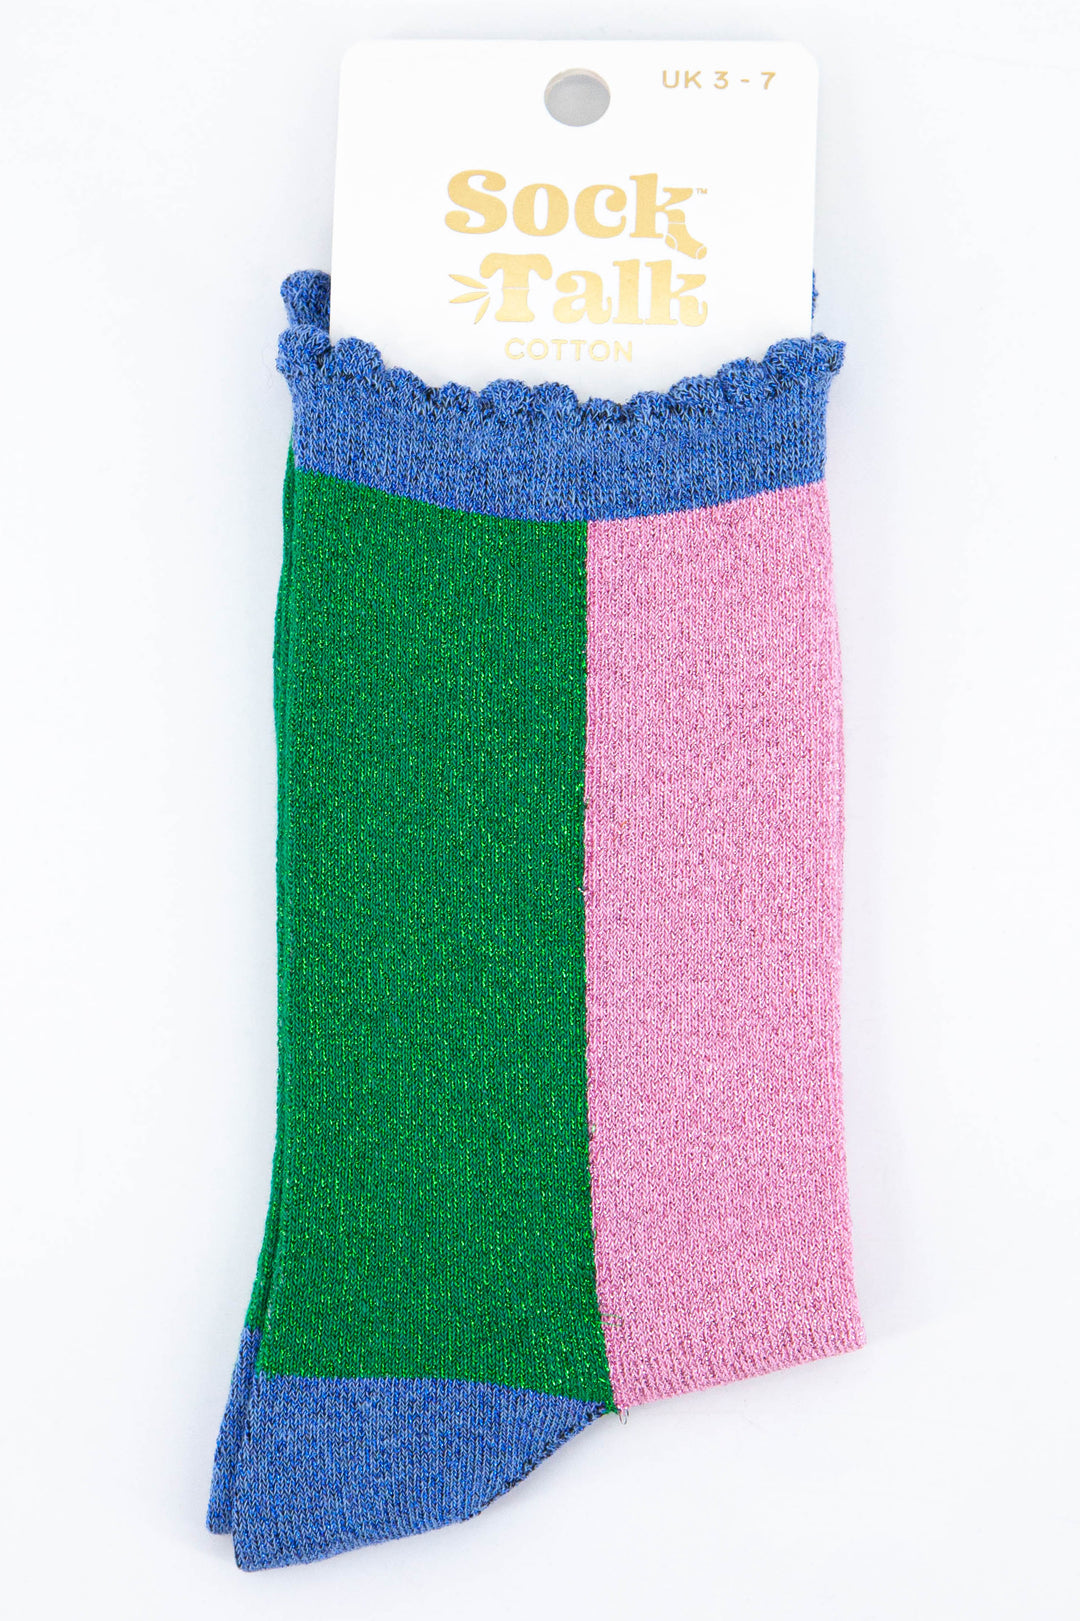 green and pink glitter ankle socks with blue scalloped edges uk size 3-7